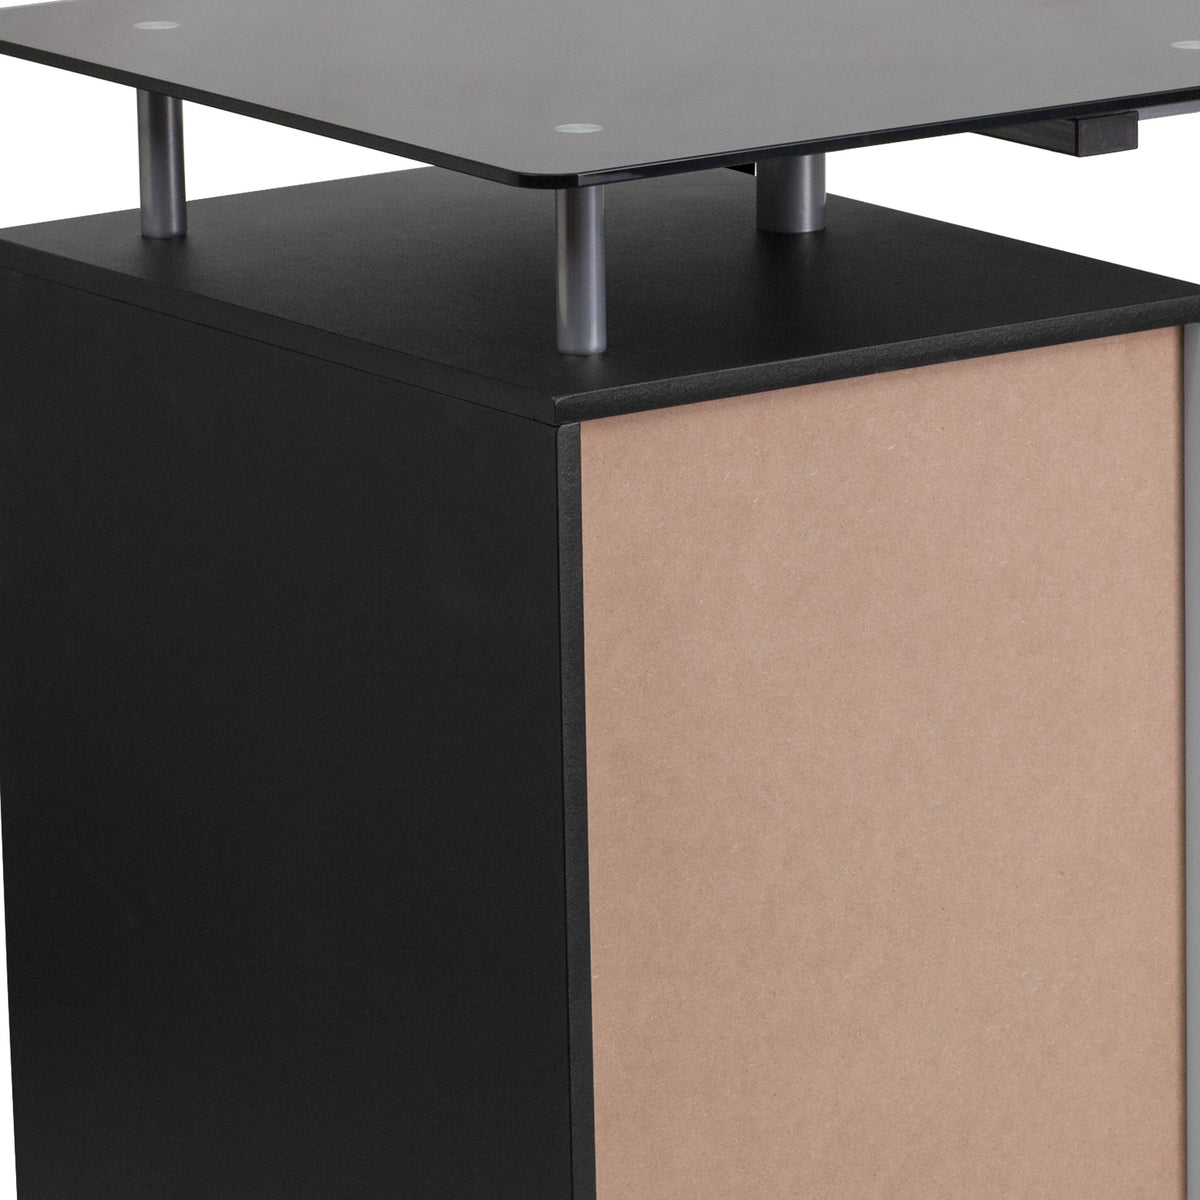 Black Computer Desk with Tempered Black Glass Top and Three Drawer Pedestal